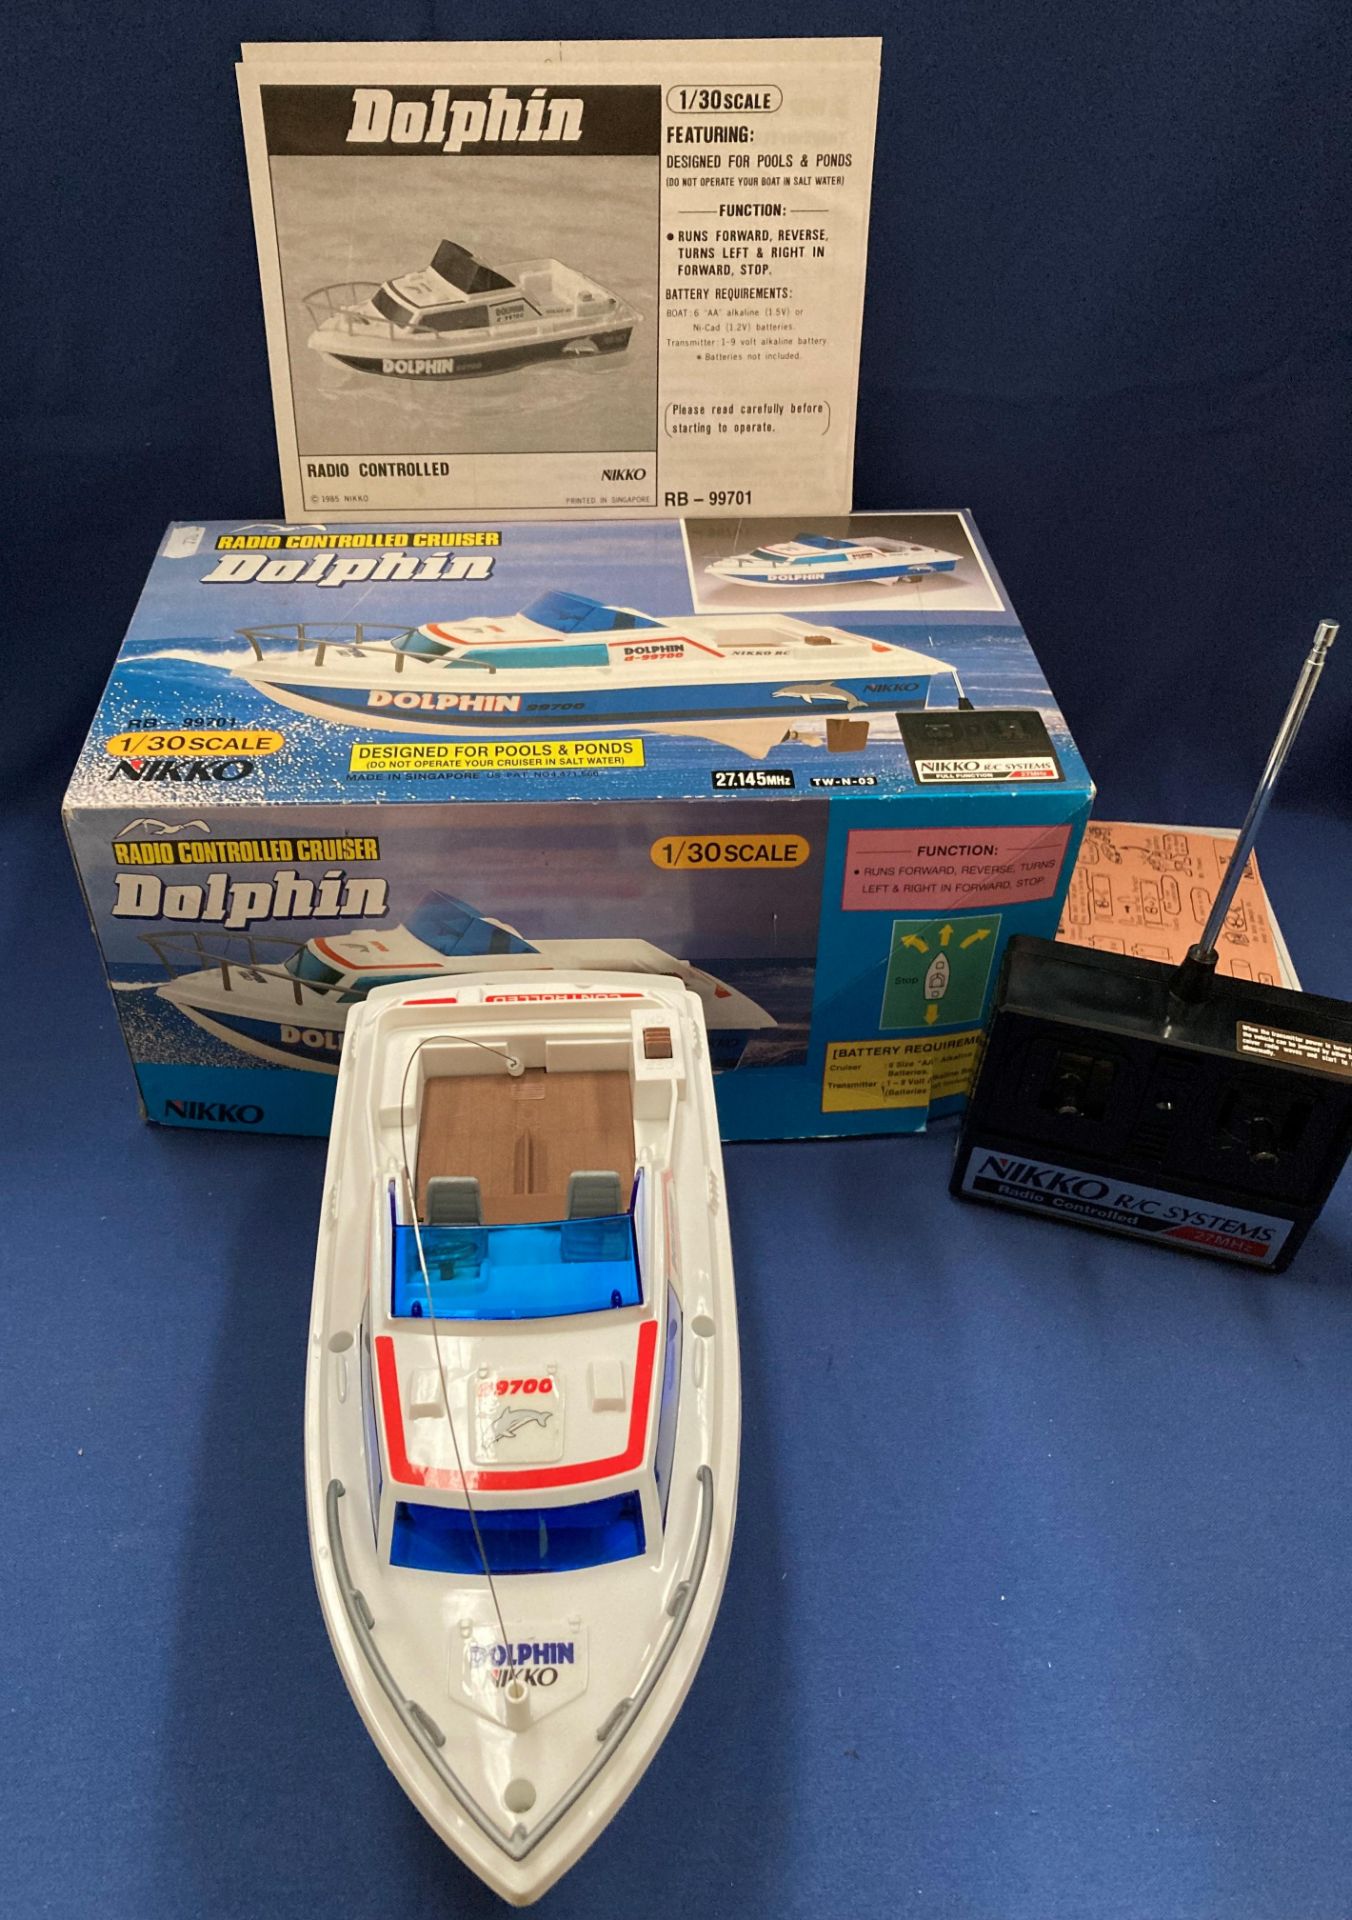 Dolphin RB-99701 1/30 scale radio controlled cruiser by Nikko - boxed (S1 glass cab rost) - Image 2 of 3